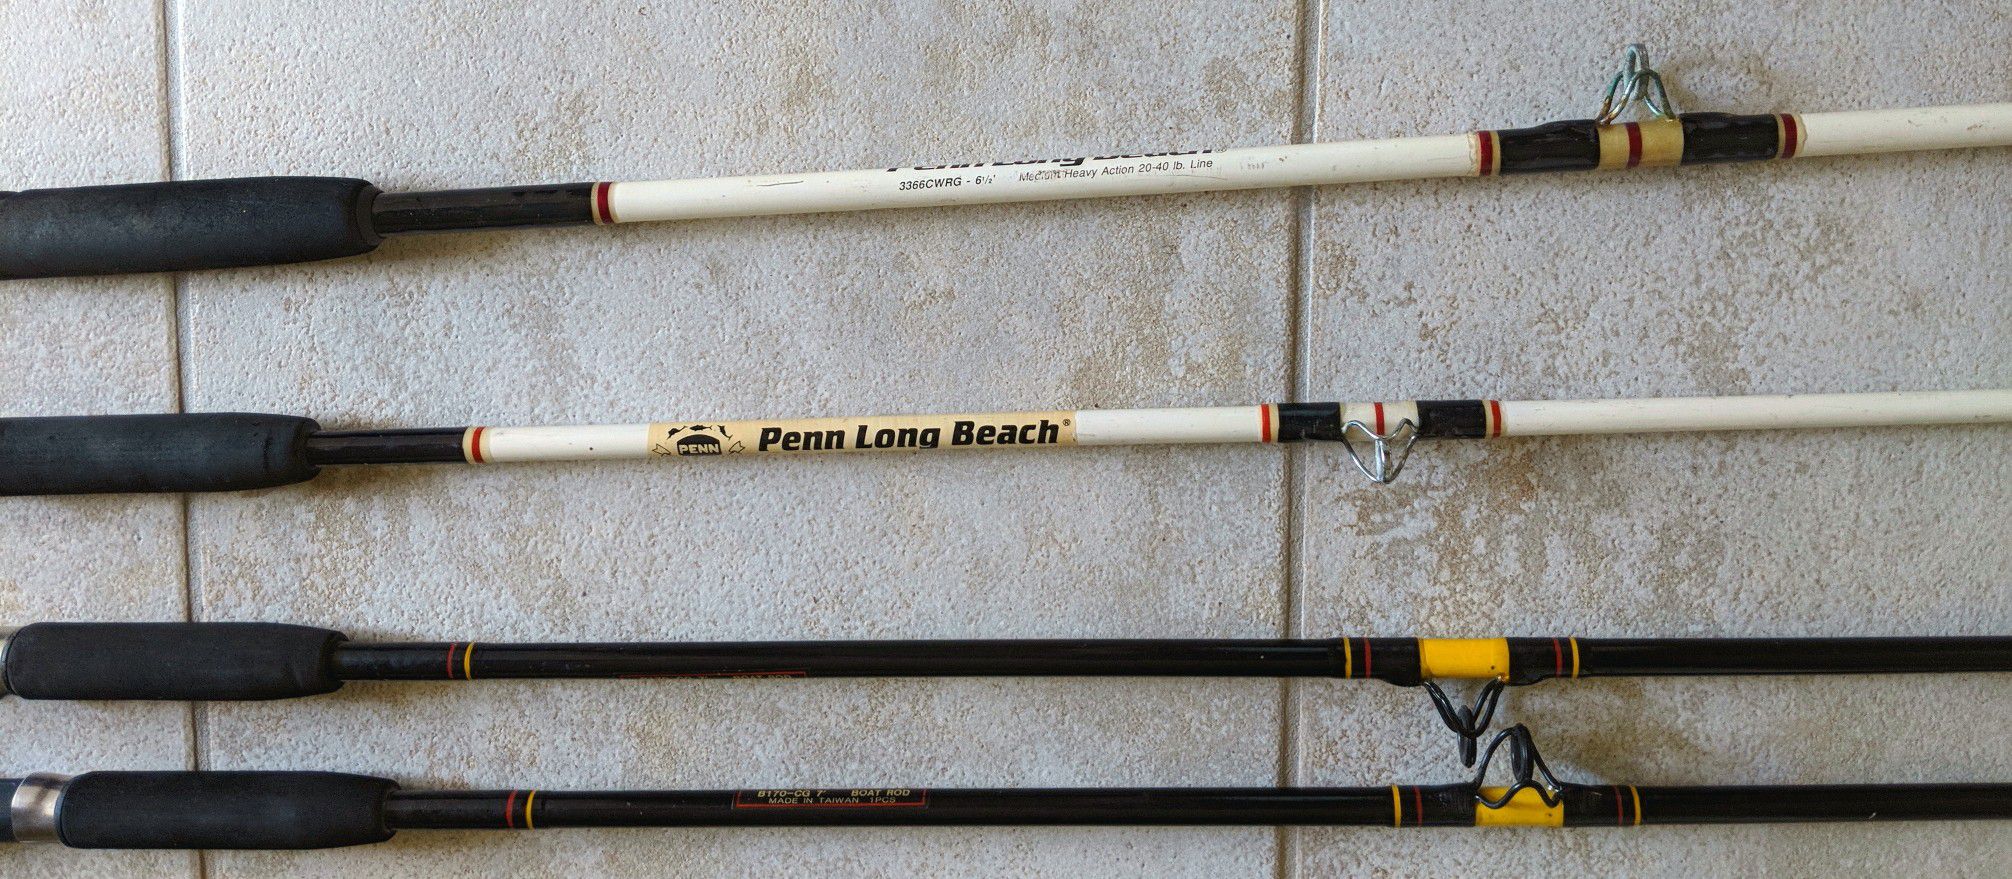 Lot of 7 Vintage Fishing Poles Rods (No Reels) for Sale in Redington Beach,  FL - OfferUp